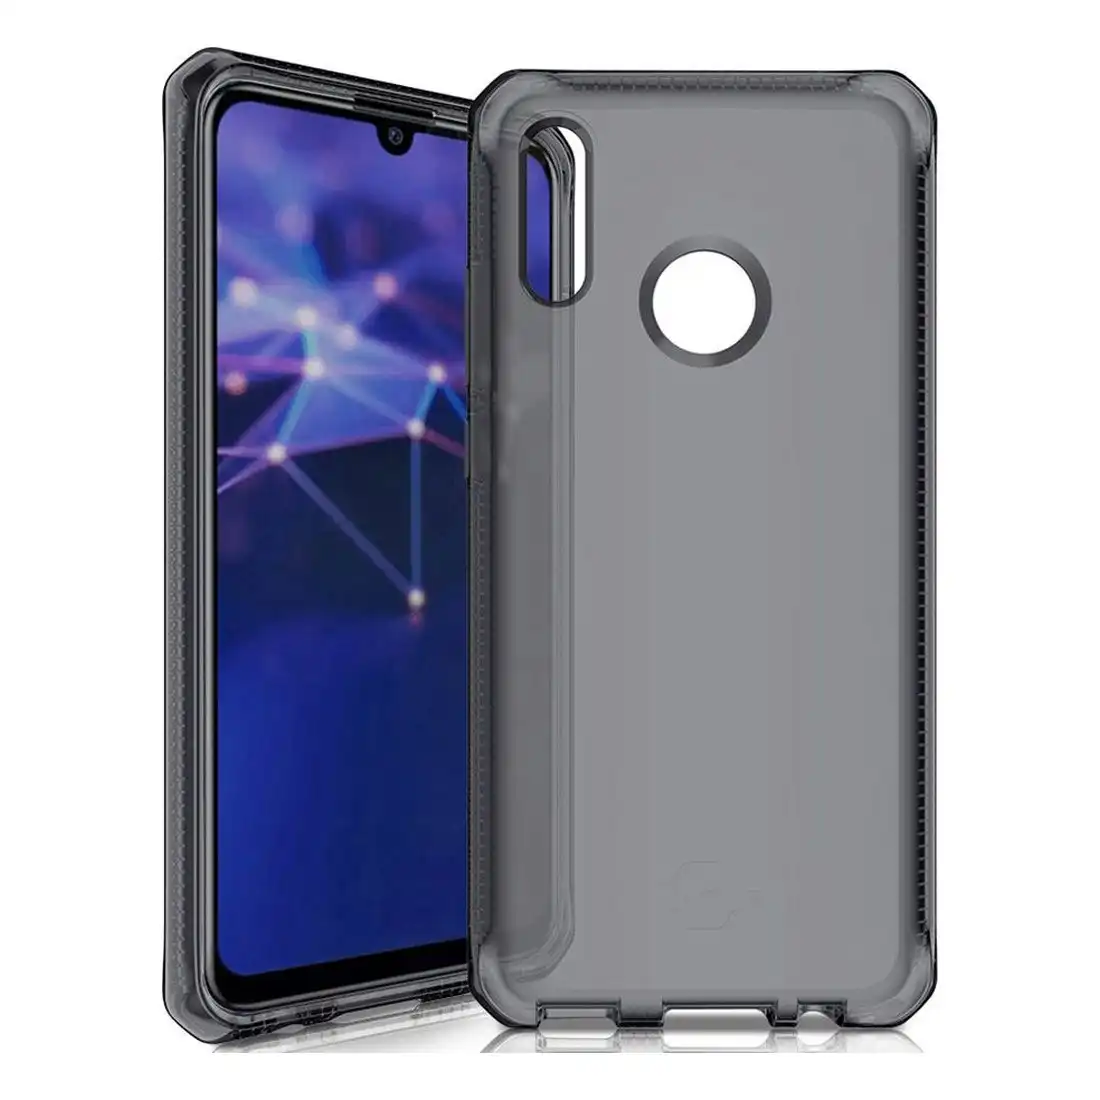 Itskins Drop Protection Cover Spectrum Case for Huawei P Smart 2019 / Honor 10 Lite - Black